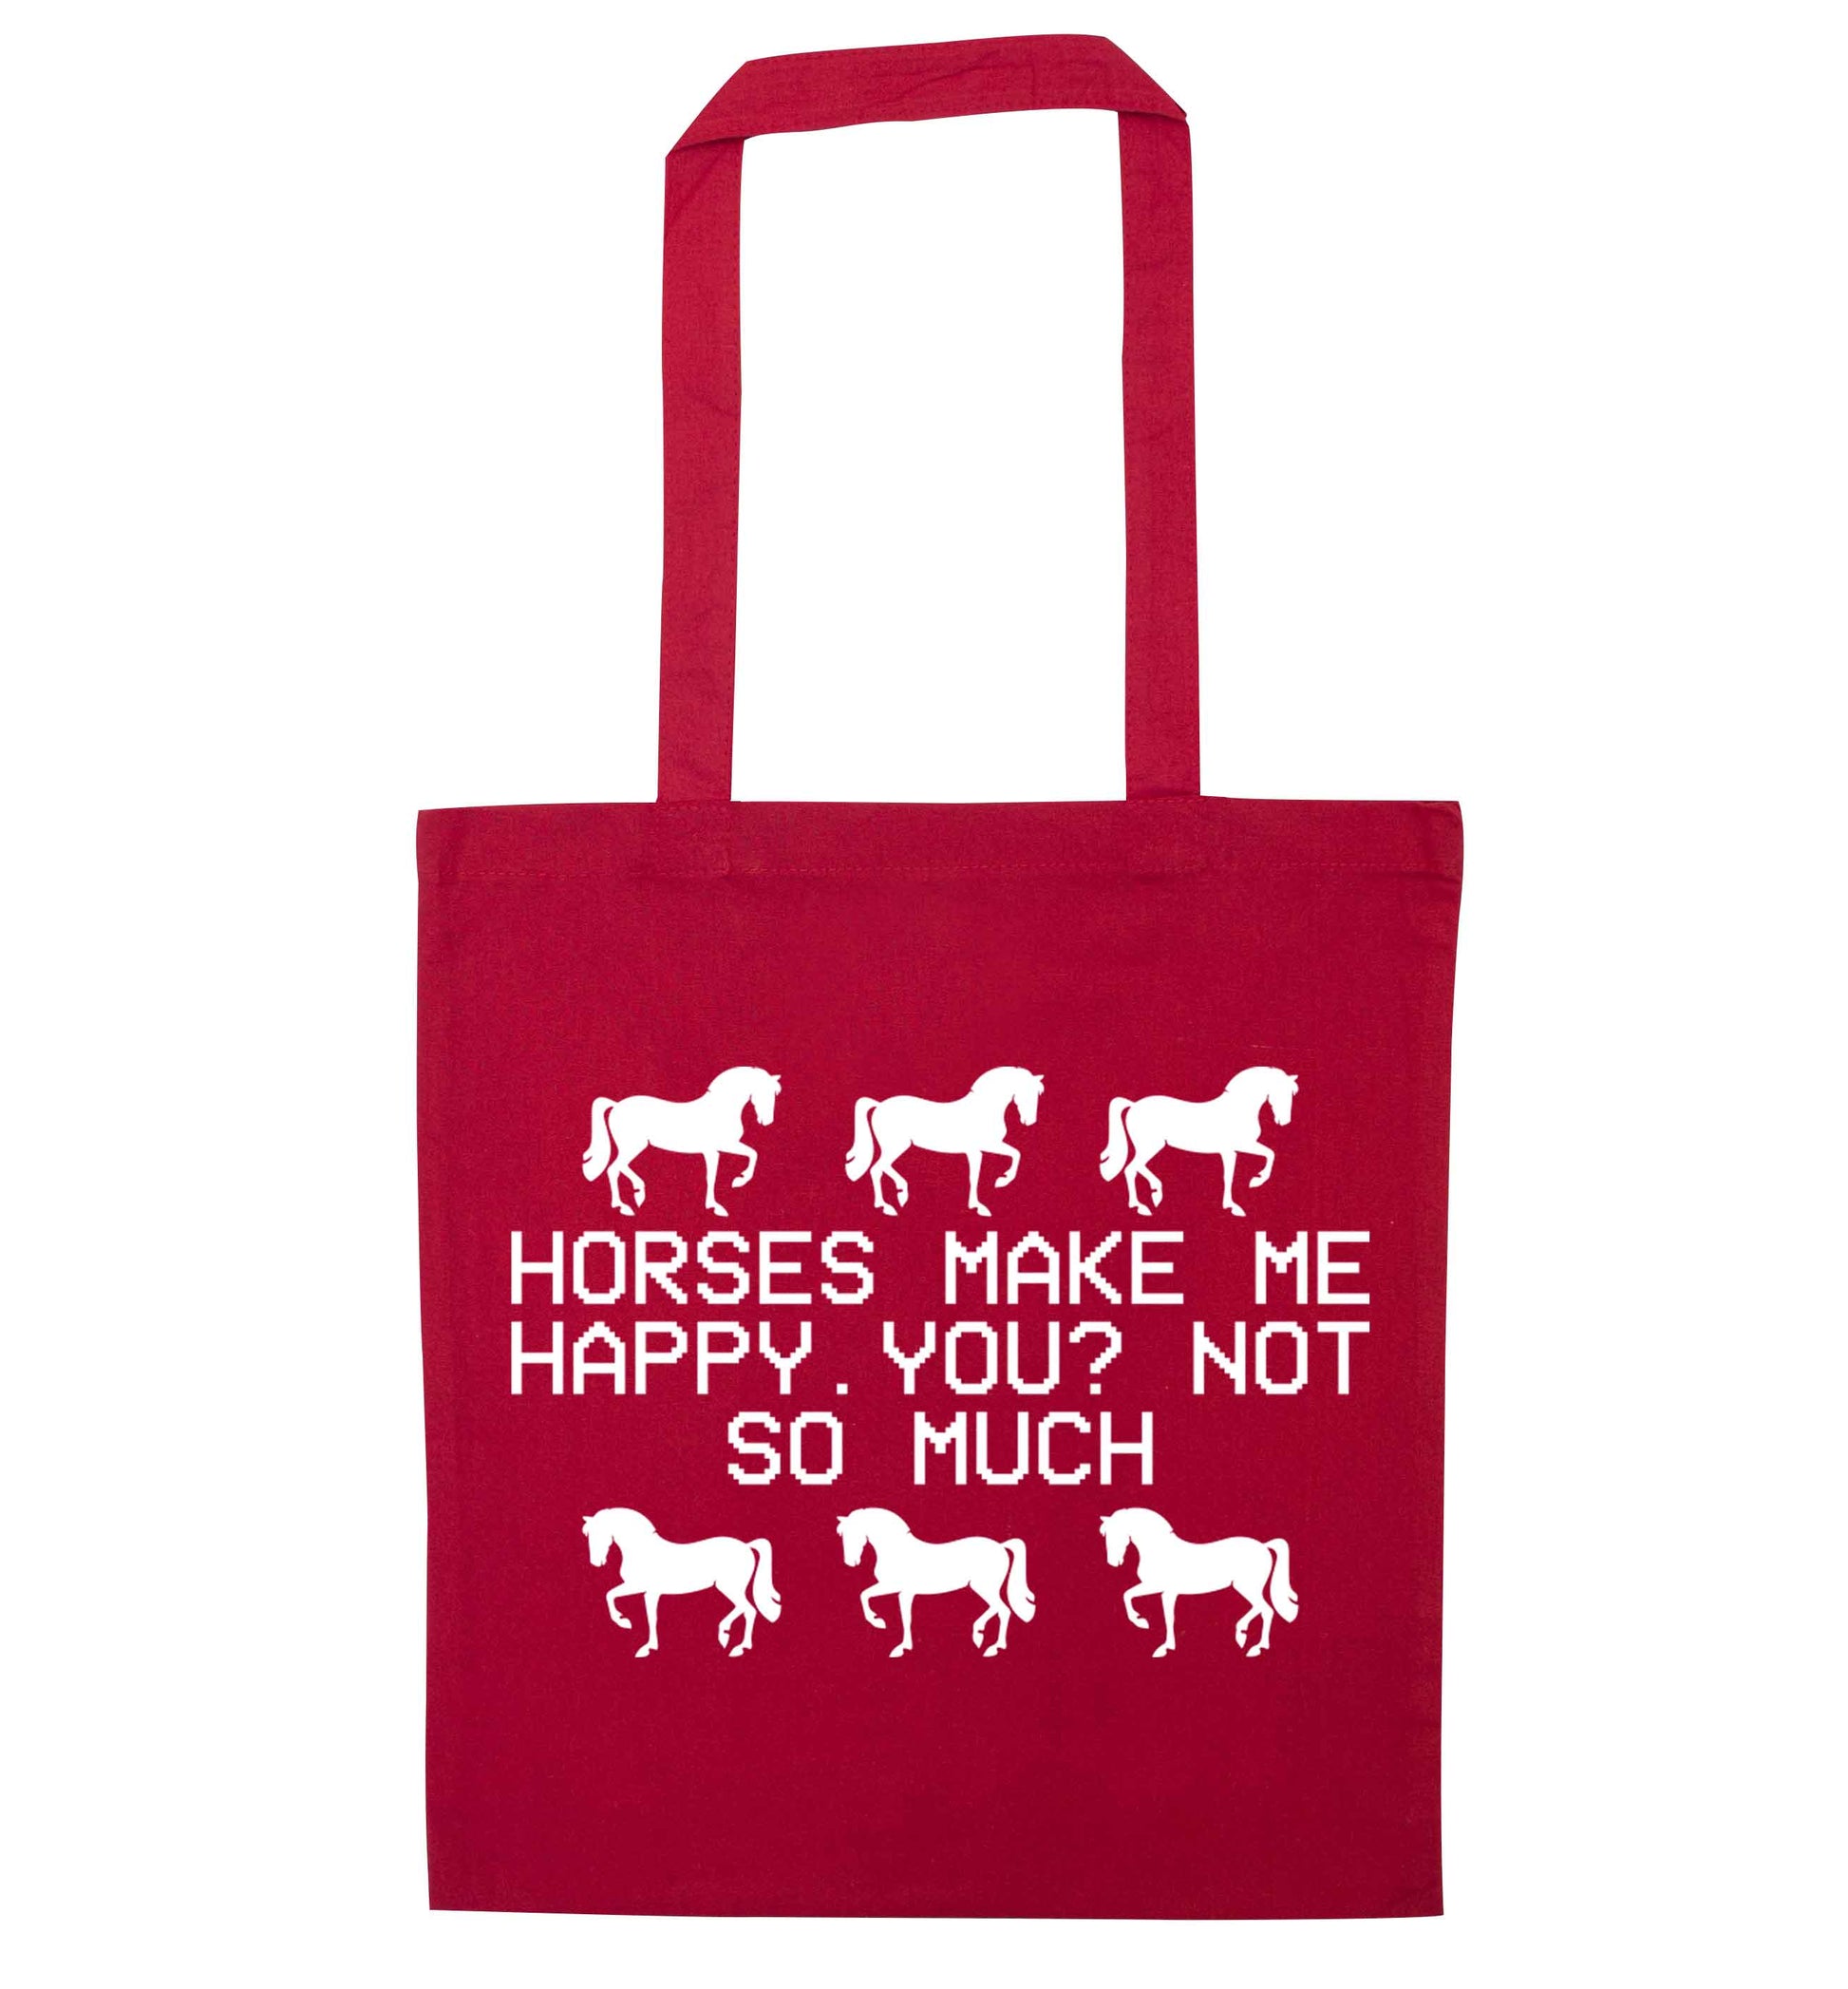 Horses make me happy, you not so much red tote bag